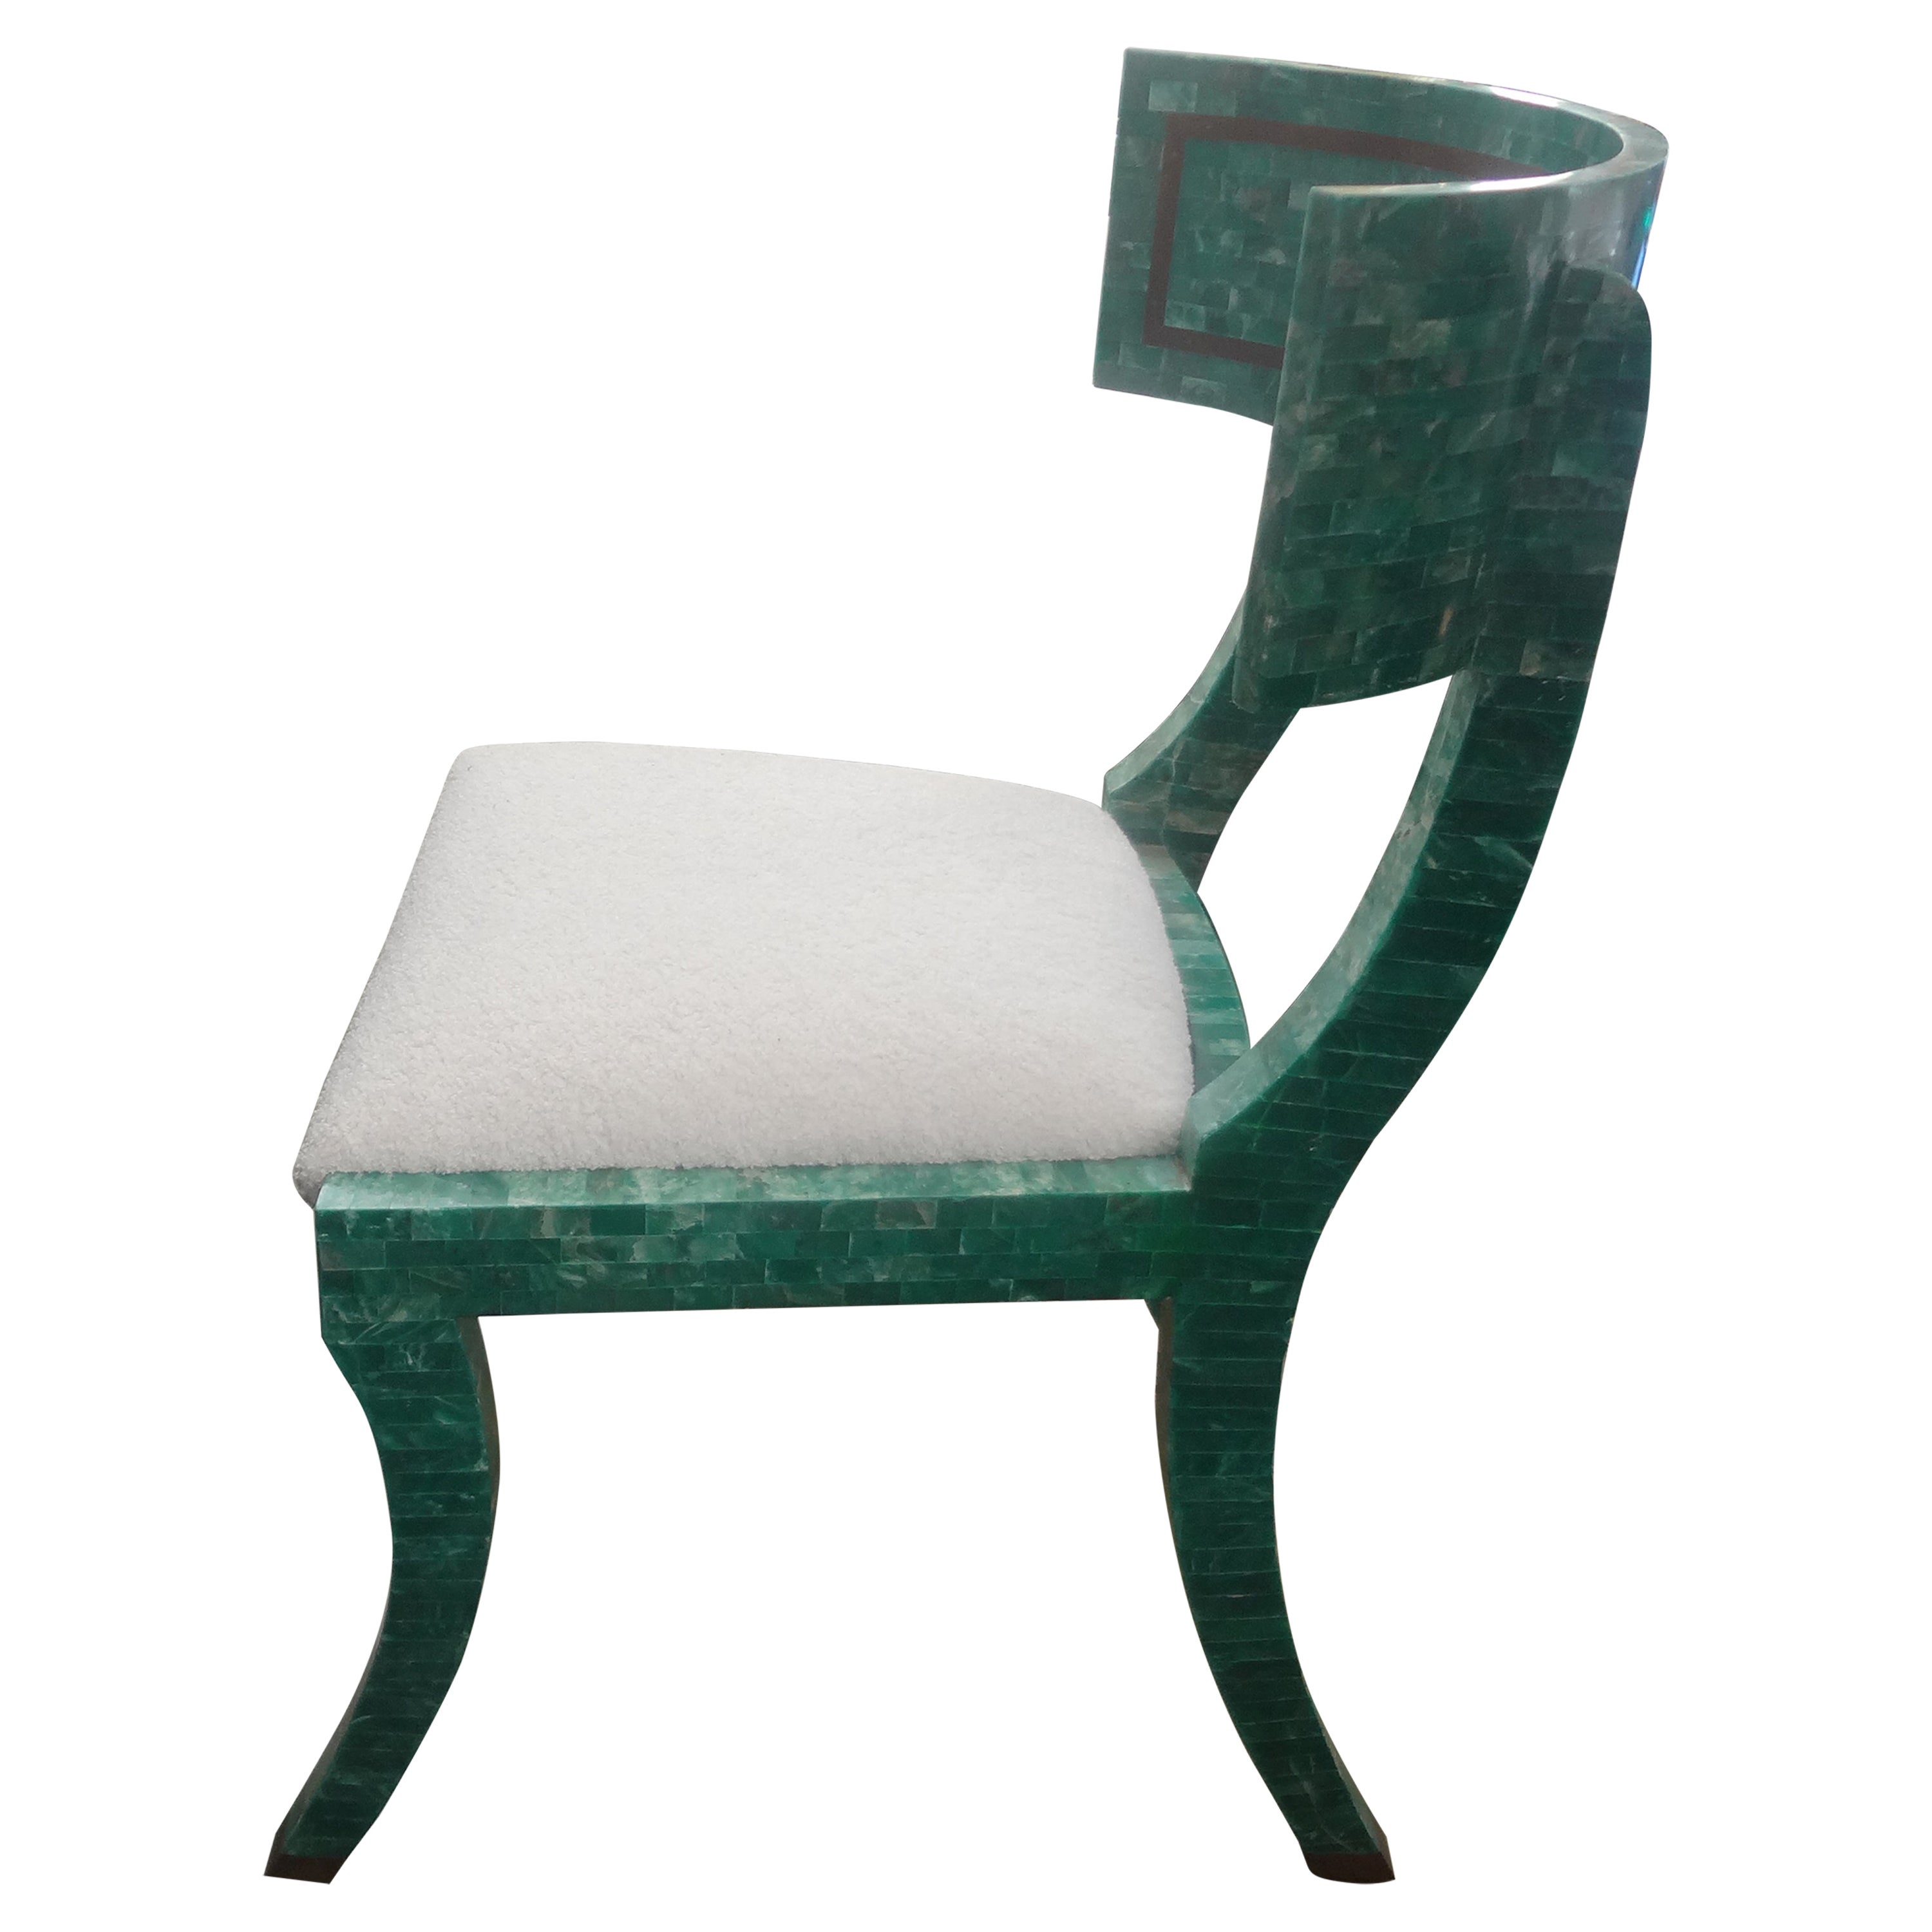 Postmodern Tessellated Stone And Brass Klismos Chair By Maitland Smith